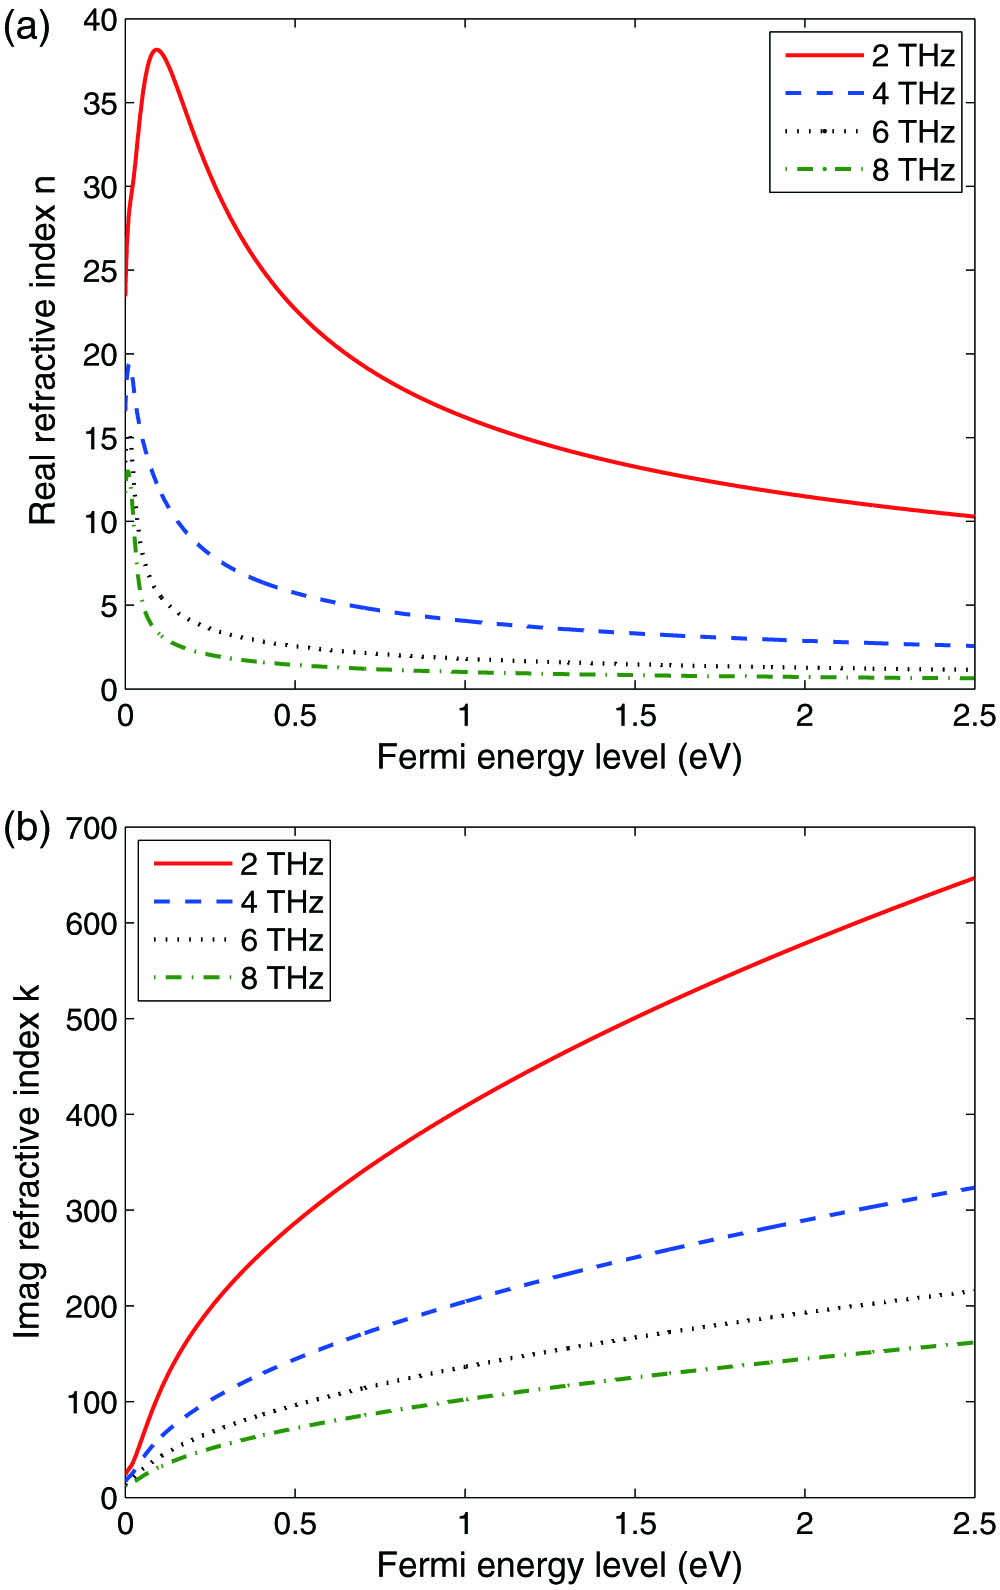 (a) Real and (b) imaginary refractive index of graphene versus the Fermi energy level for 2, 4, 6, and 8 THz, respectively.